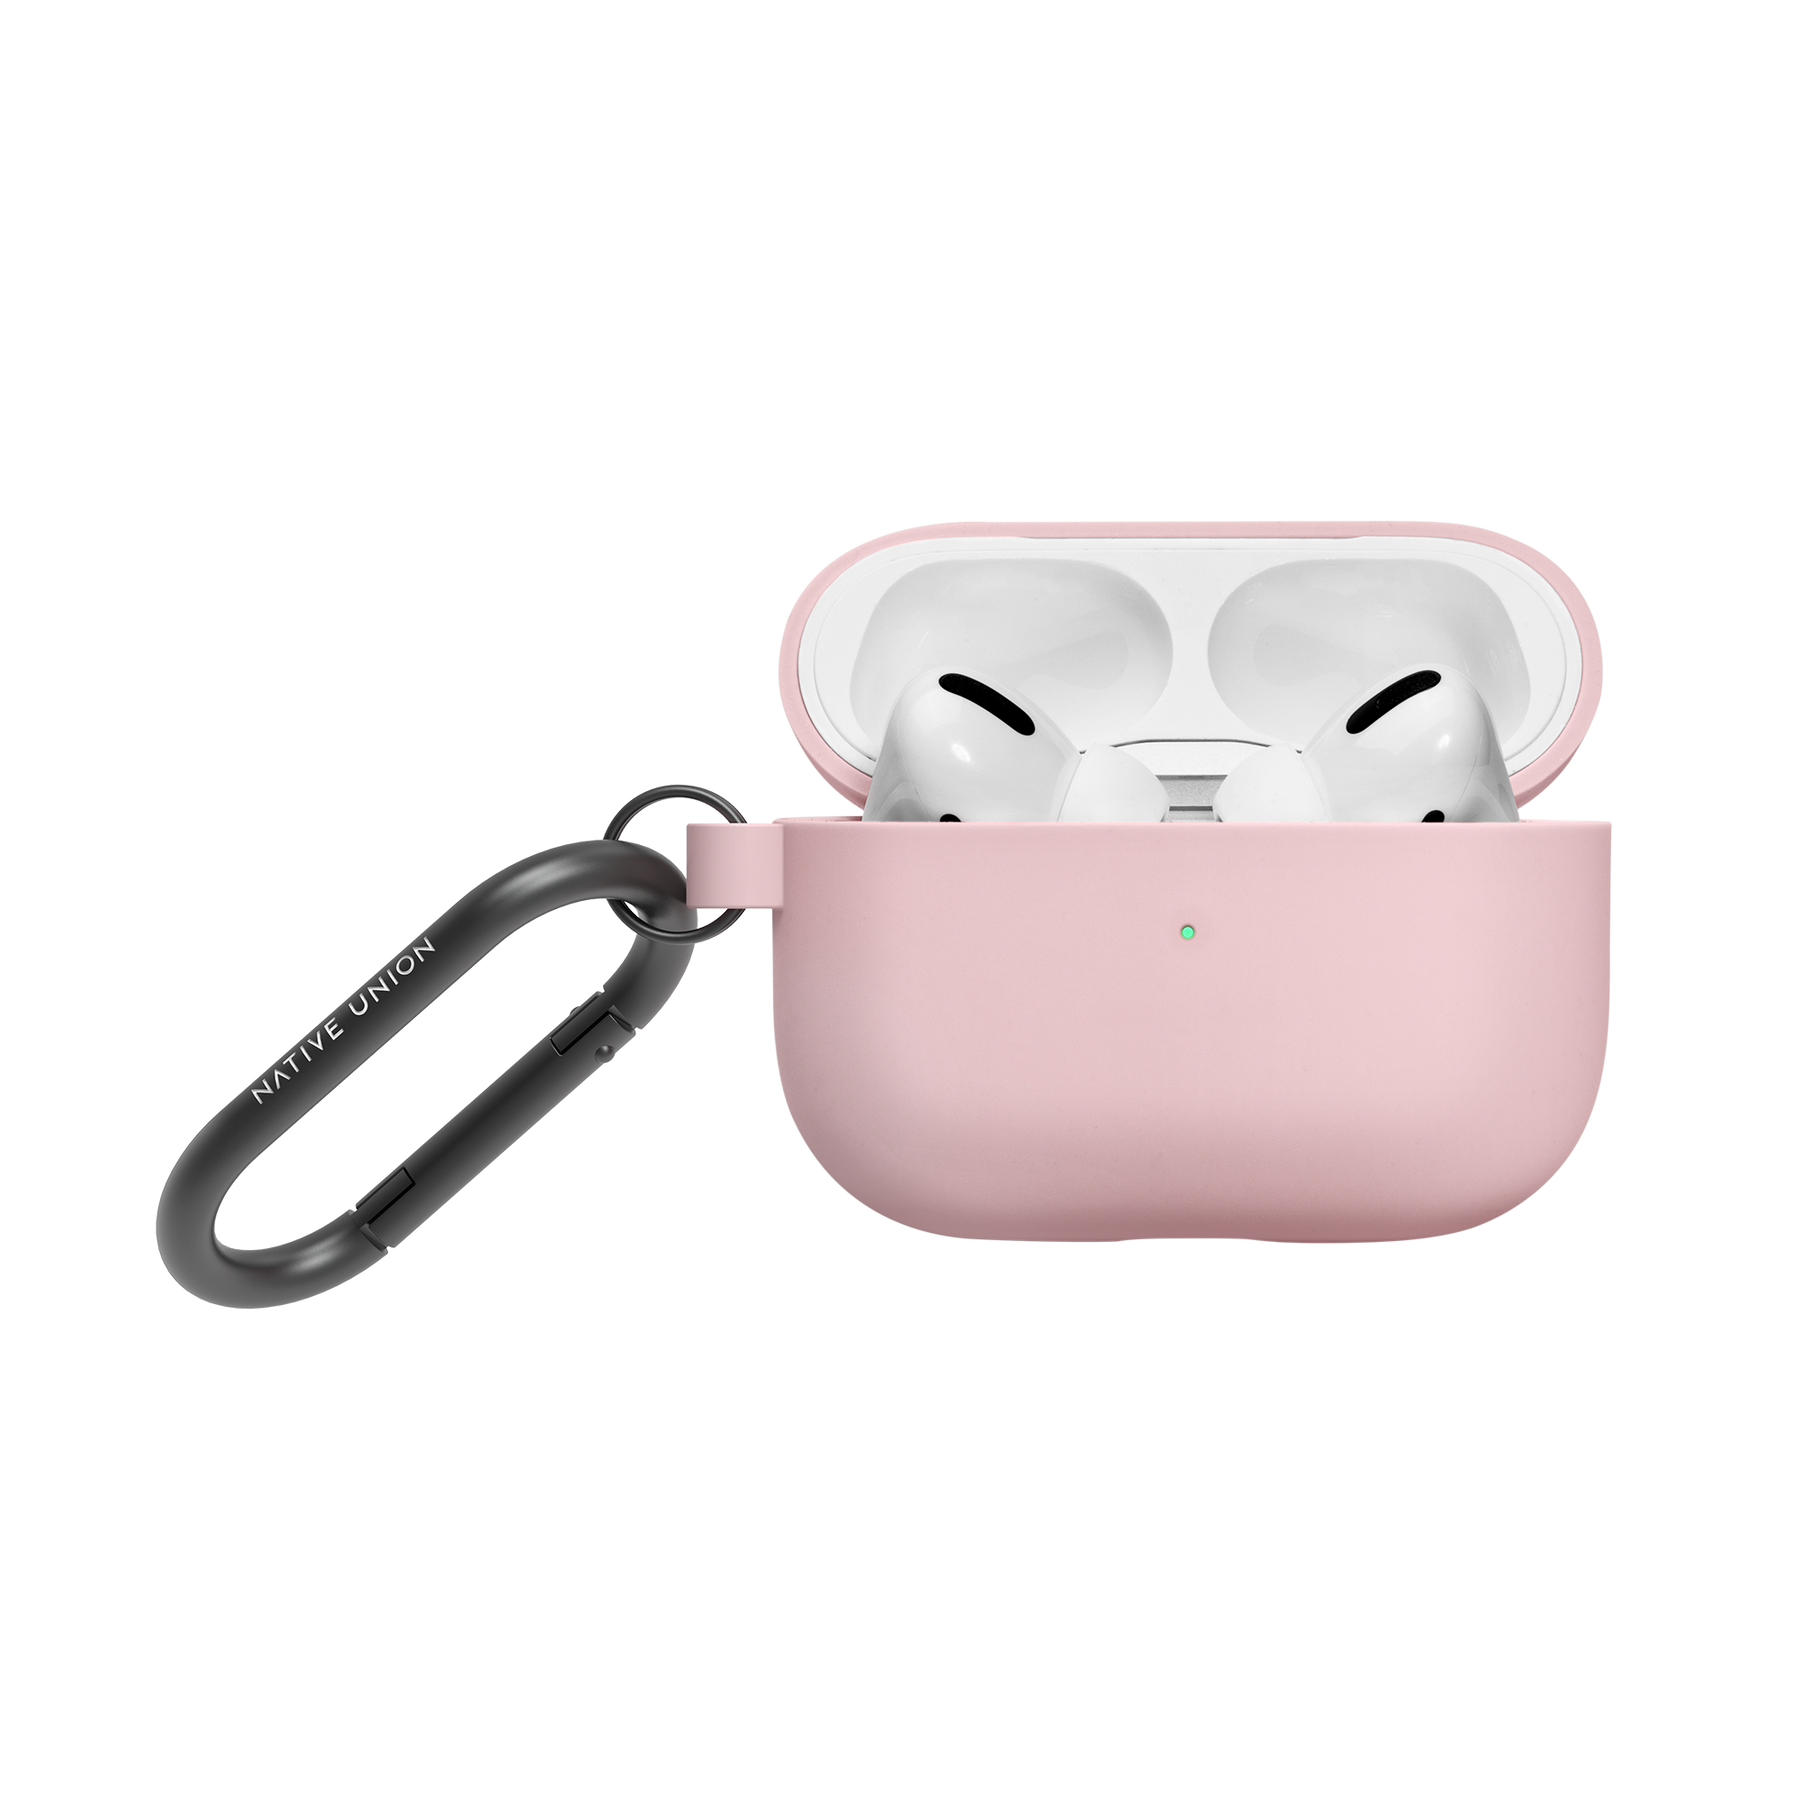 34391665016971,Roam Case for AirPods Pro - Rose